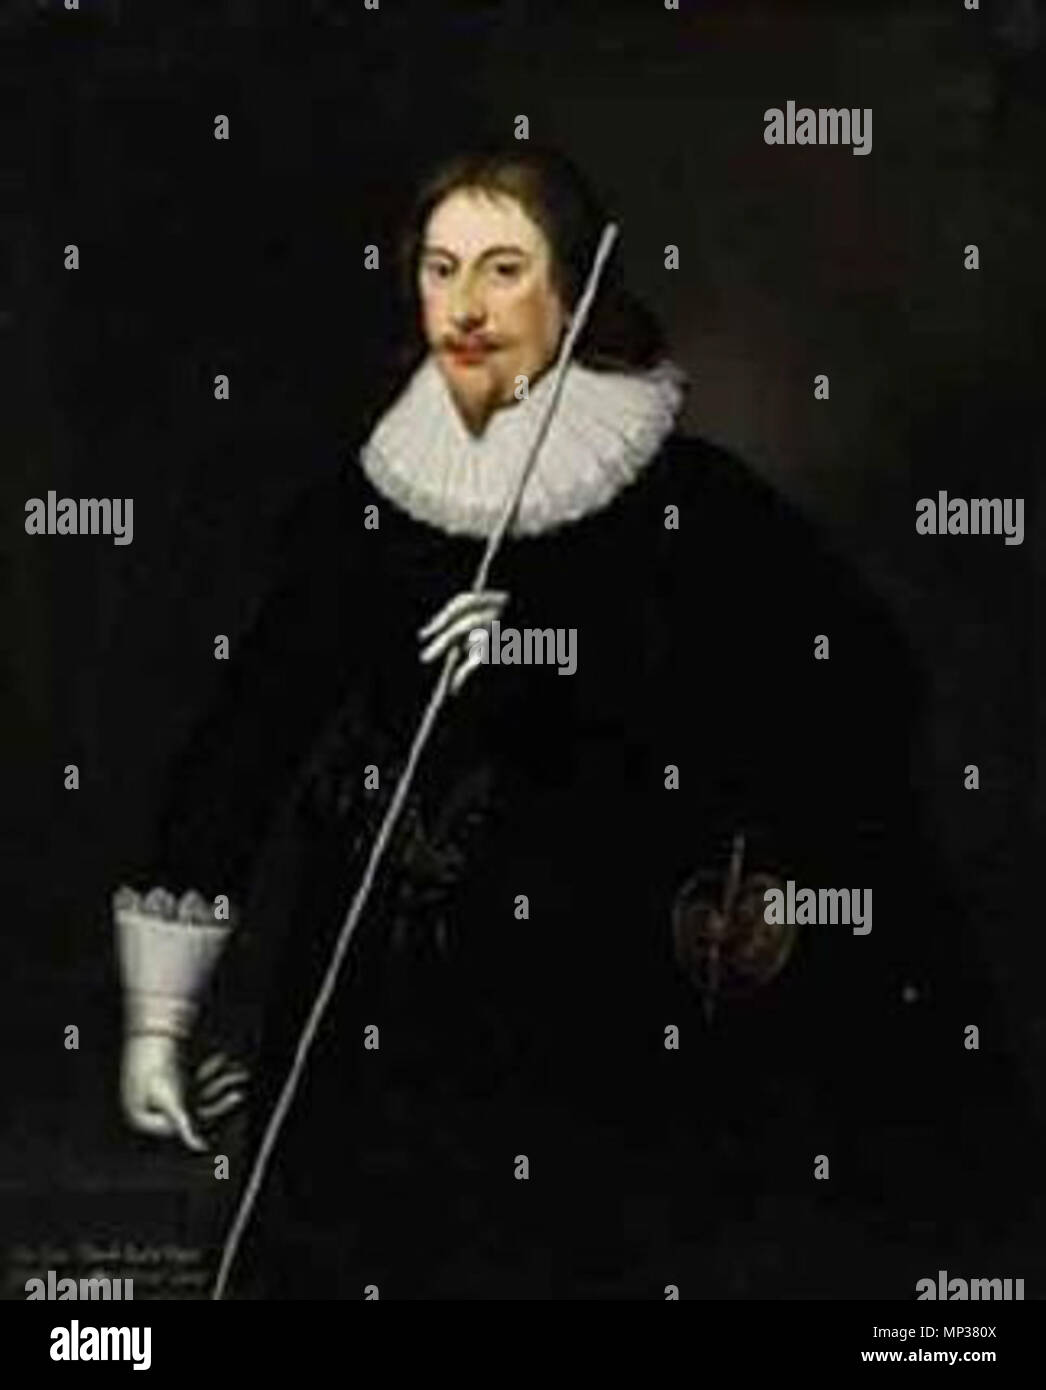 . English: Painting purported to be of John de Vere, 15th Earl of Oxford, by Daniël Mijtens (Daniel Mytens). More recently it has been labelled as a portrait of an unknown man, as the 15th Earl died before Mytens was born. The painting bears the inscription: 'John Vere Fifteenth Earl of Oxford/Lord [illegible] of England/Gibson pinxit'. 1 October 2010.   Daniël Mijtens  (circa 1590–circa 1647)     Alternative names Daniël Mijtens the Elder, Daniel Mytens (I), Daniel van Mytens (I)  Description Dutch painter, draughtsman and court painter  Date of birth/death circa 1590 circa 1647  Location of  Stock Photo